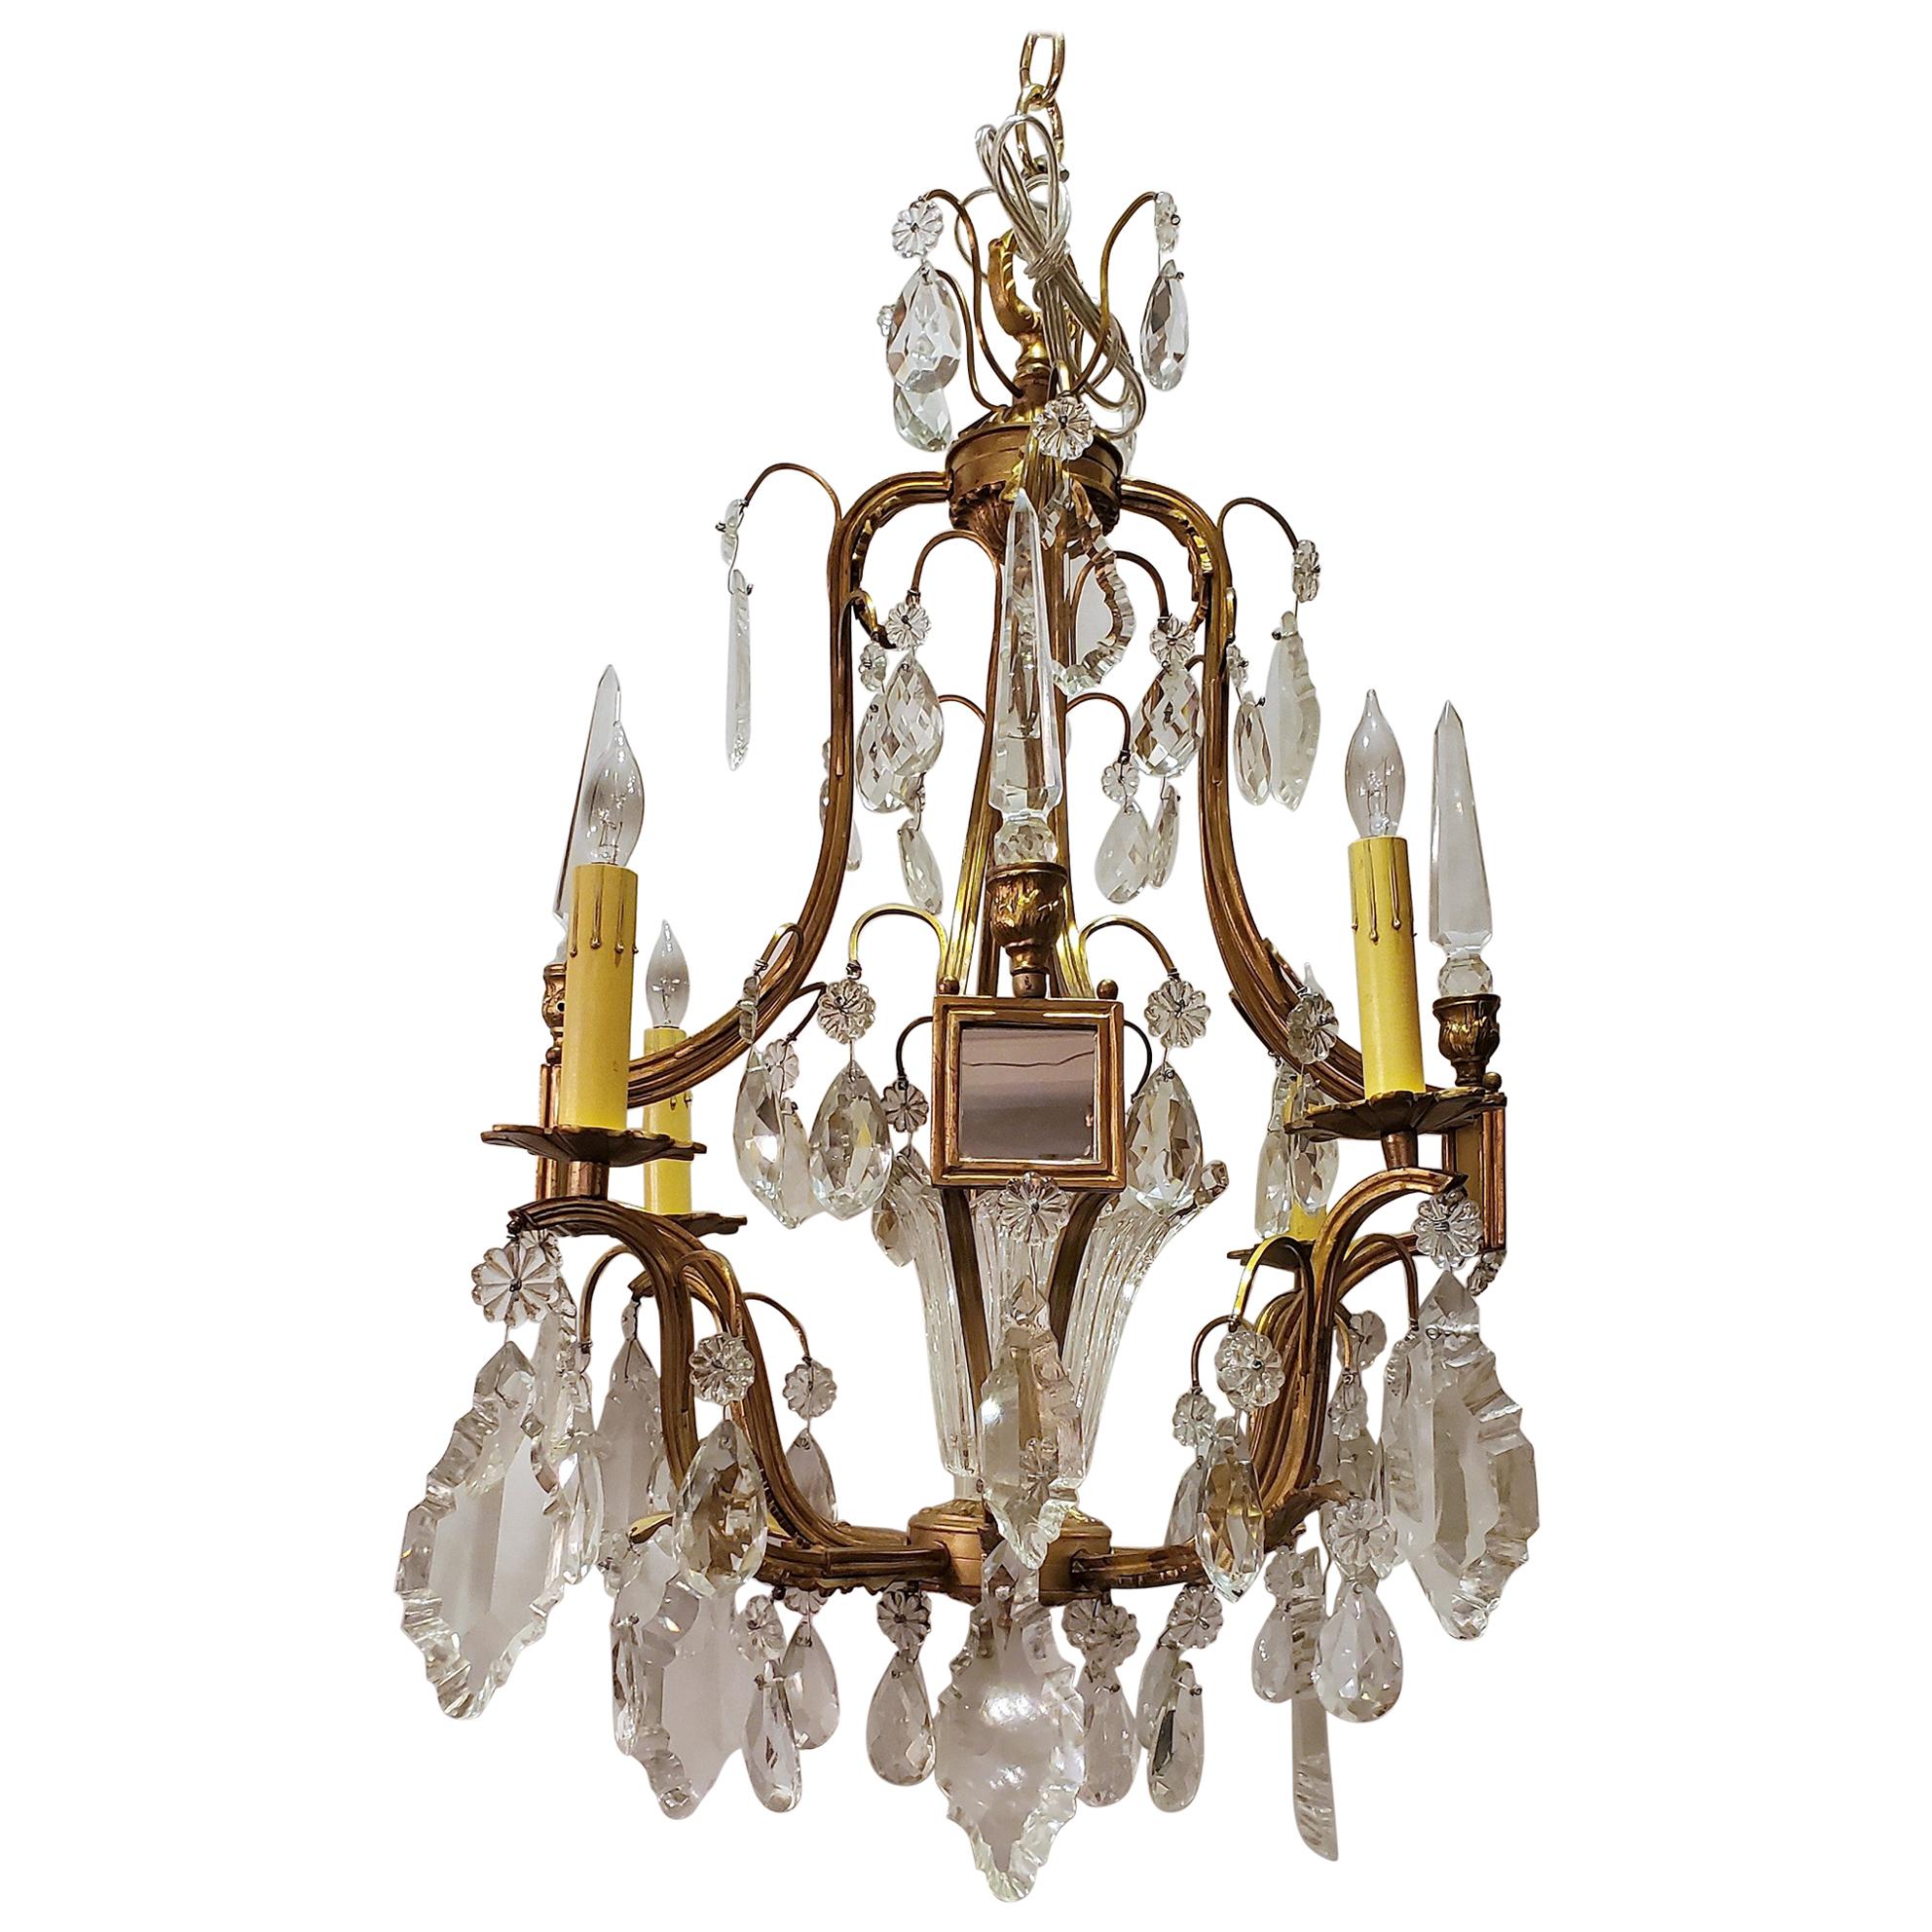 Antique French Ormolu and Baccarat Crystal Chandelier with Mirror Insets